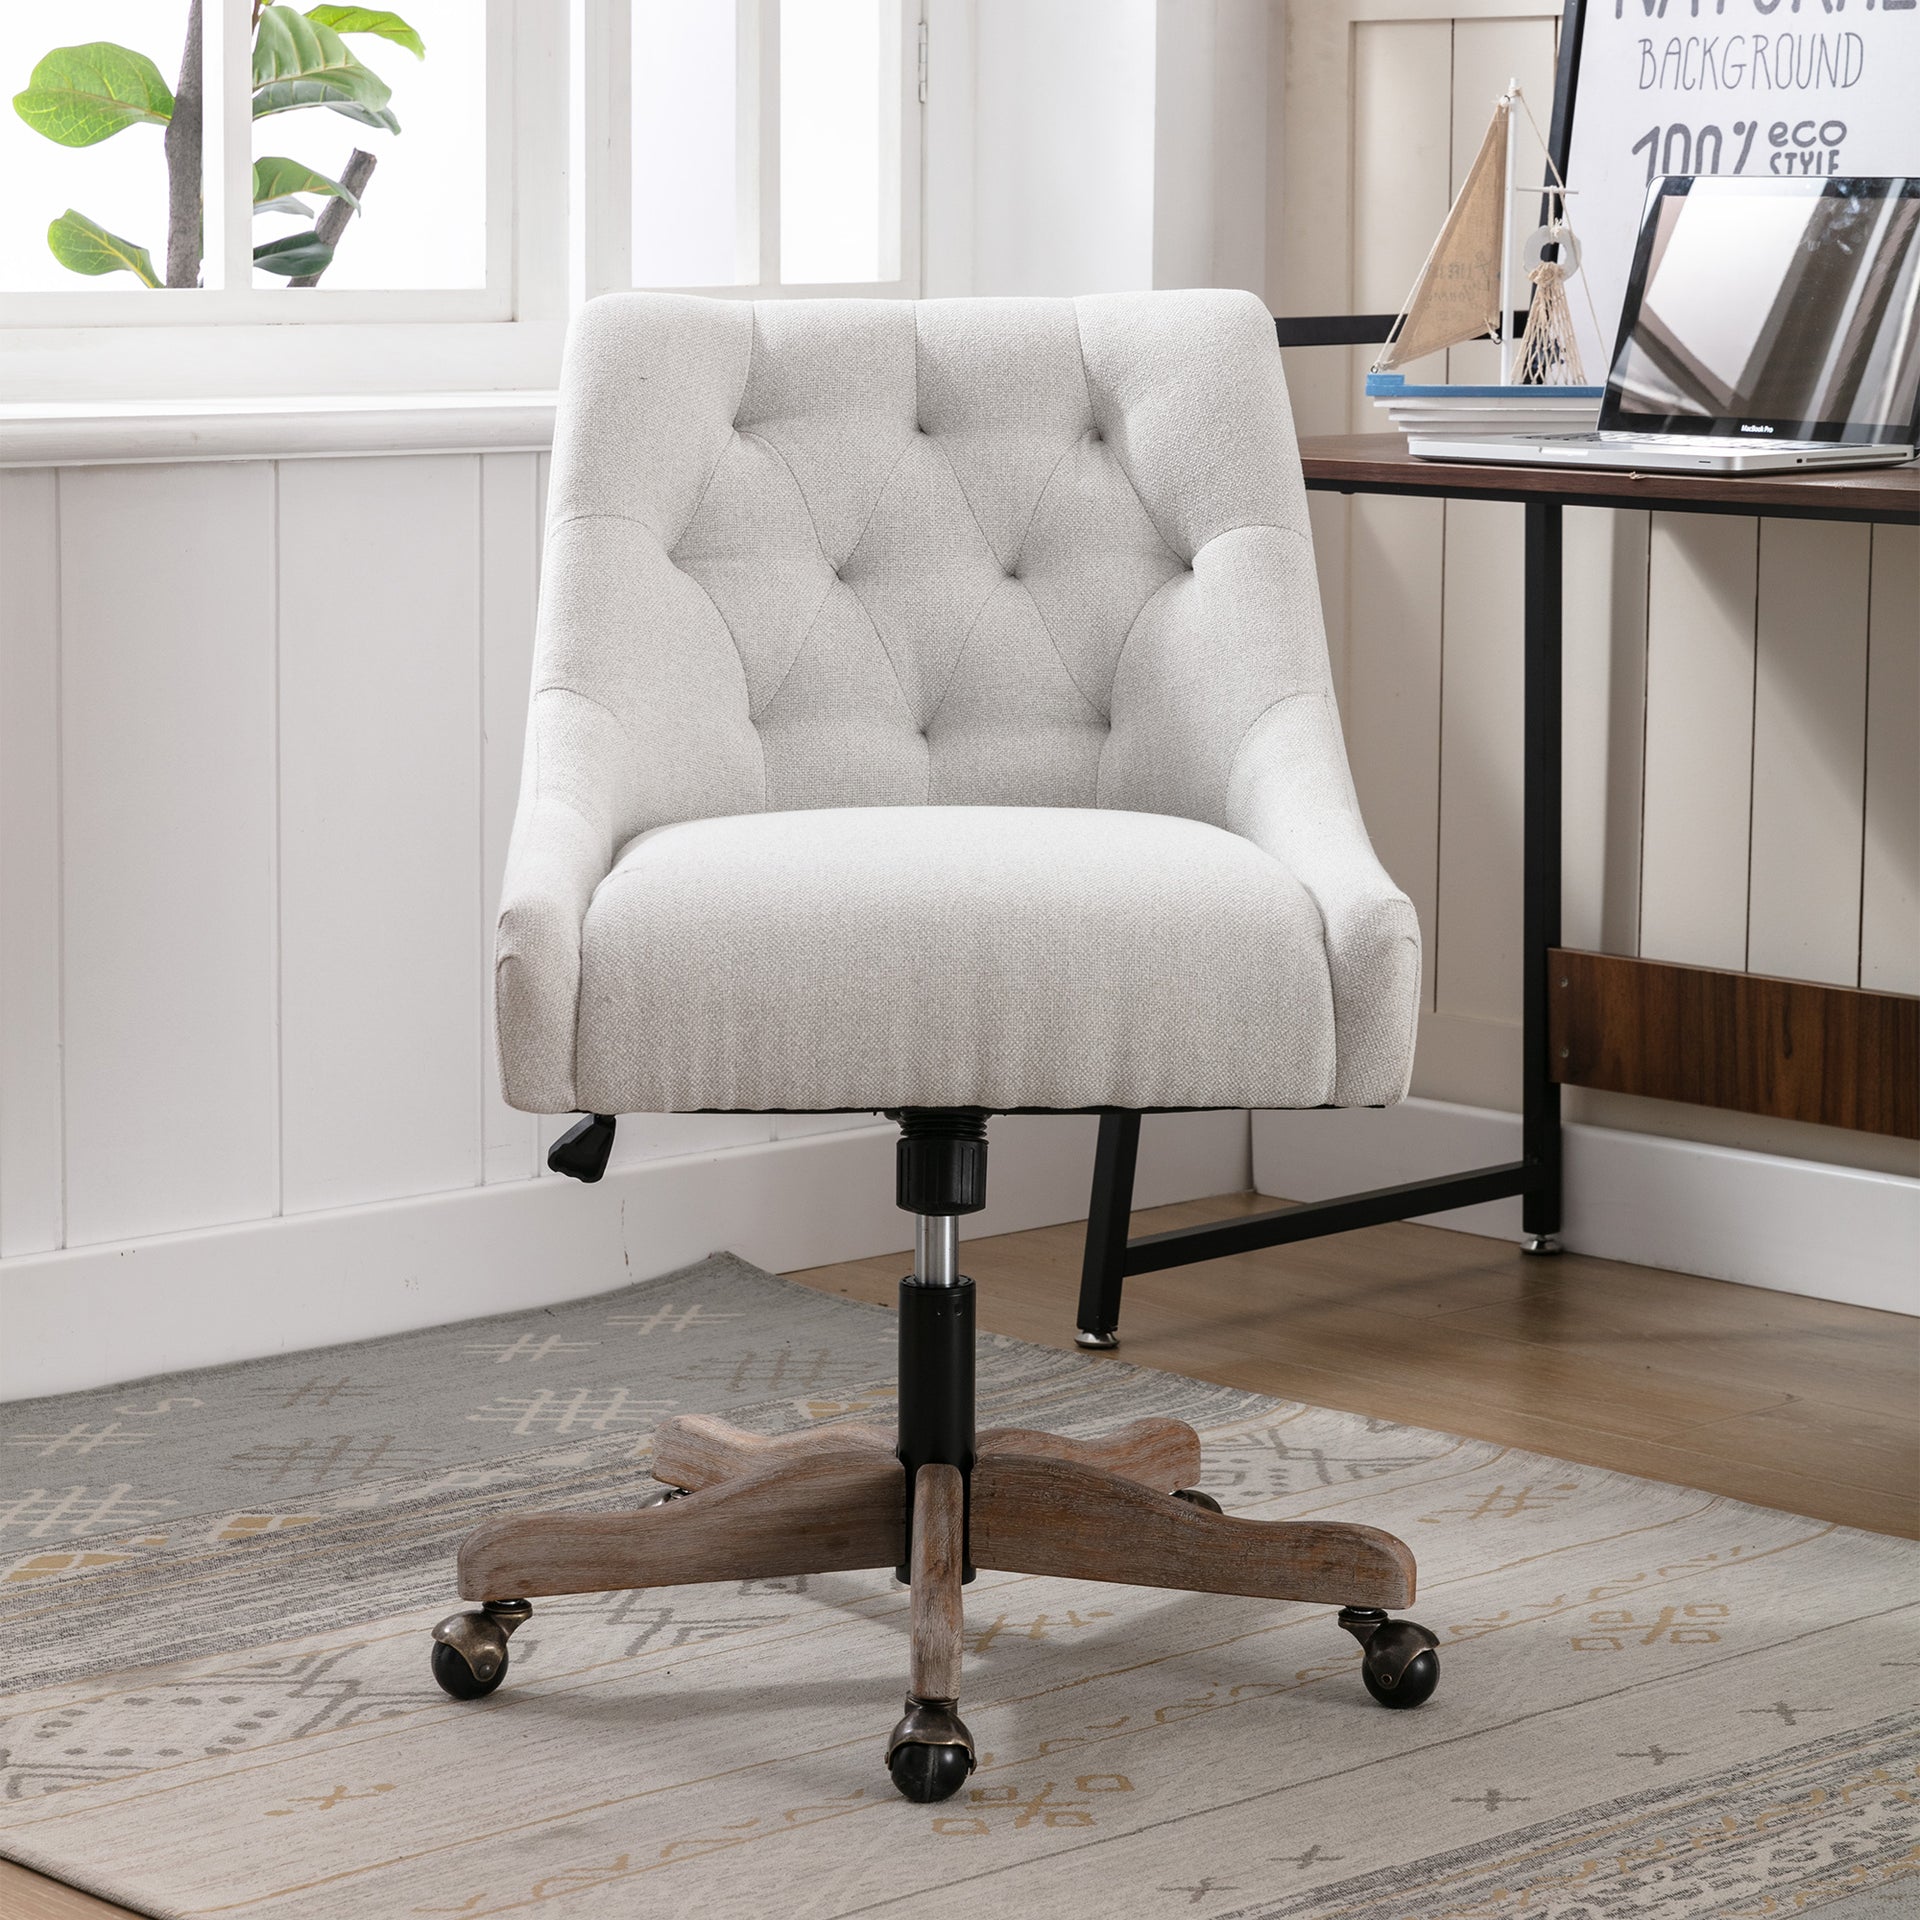 Swivel Shell Chair for Office, Living Room/Modern Leisure office Chair